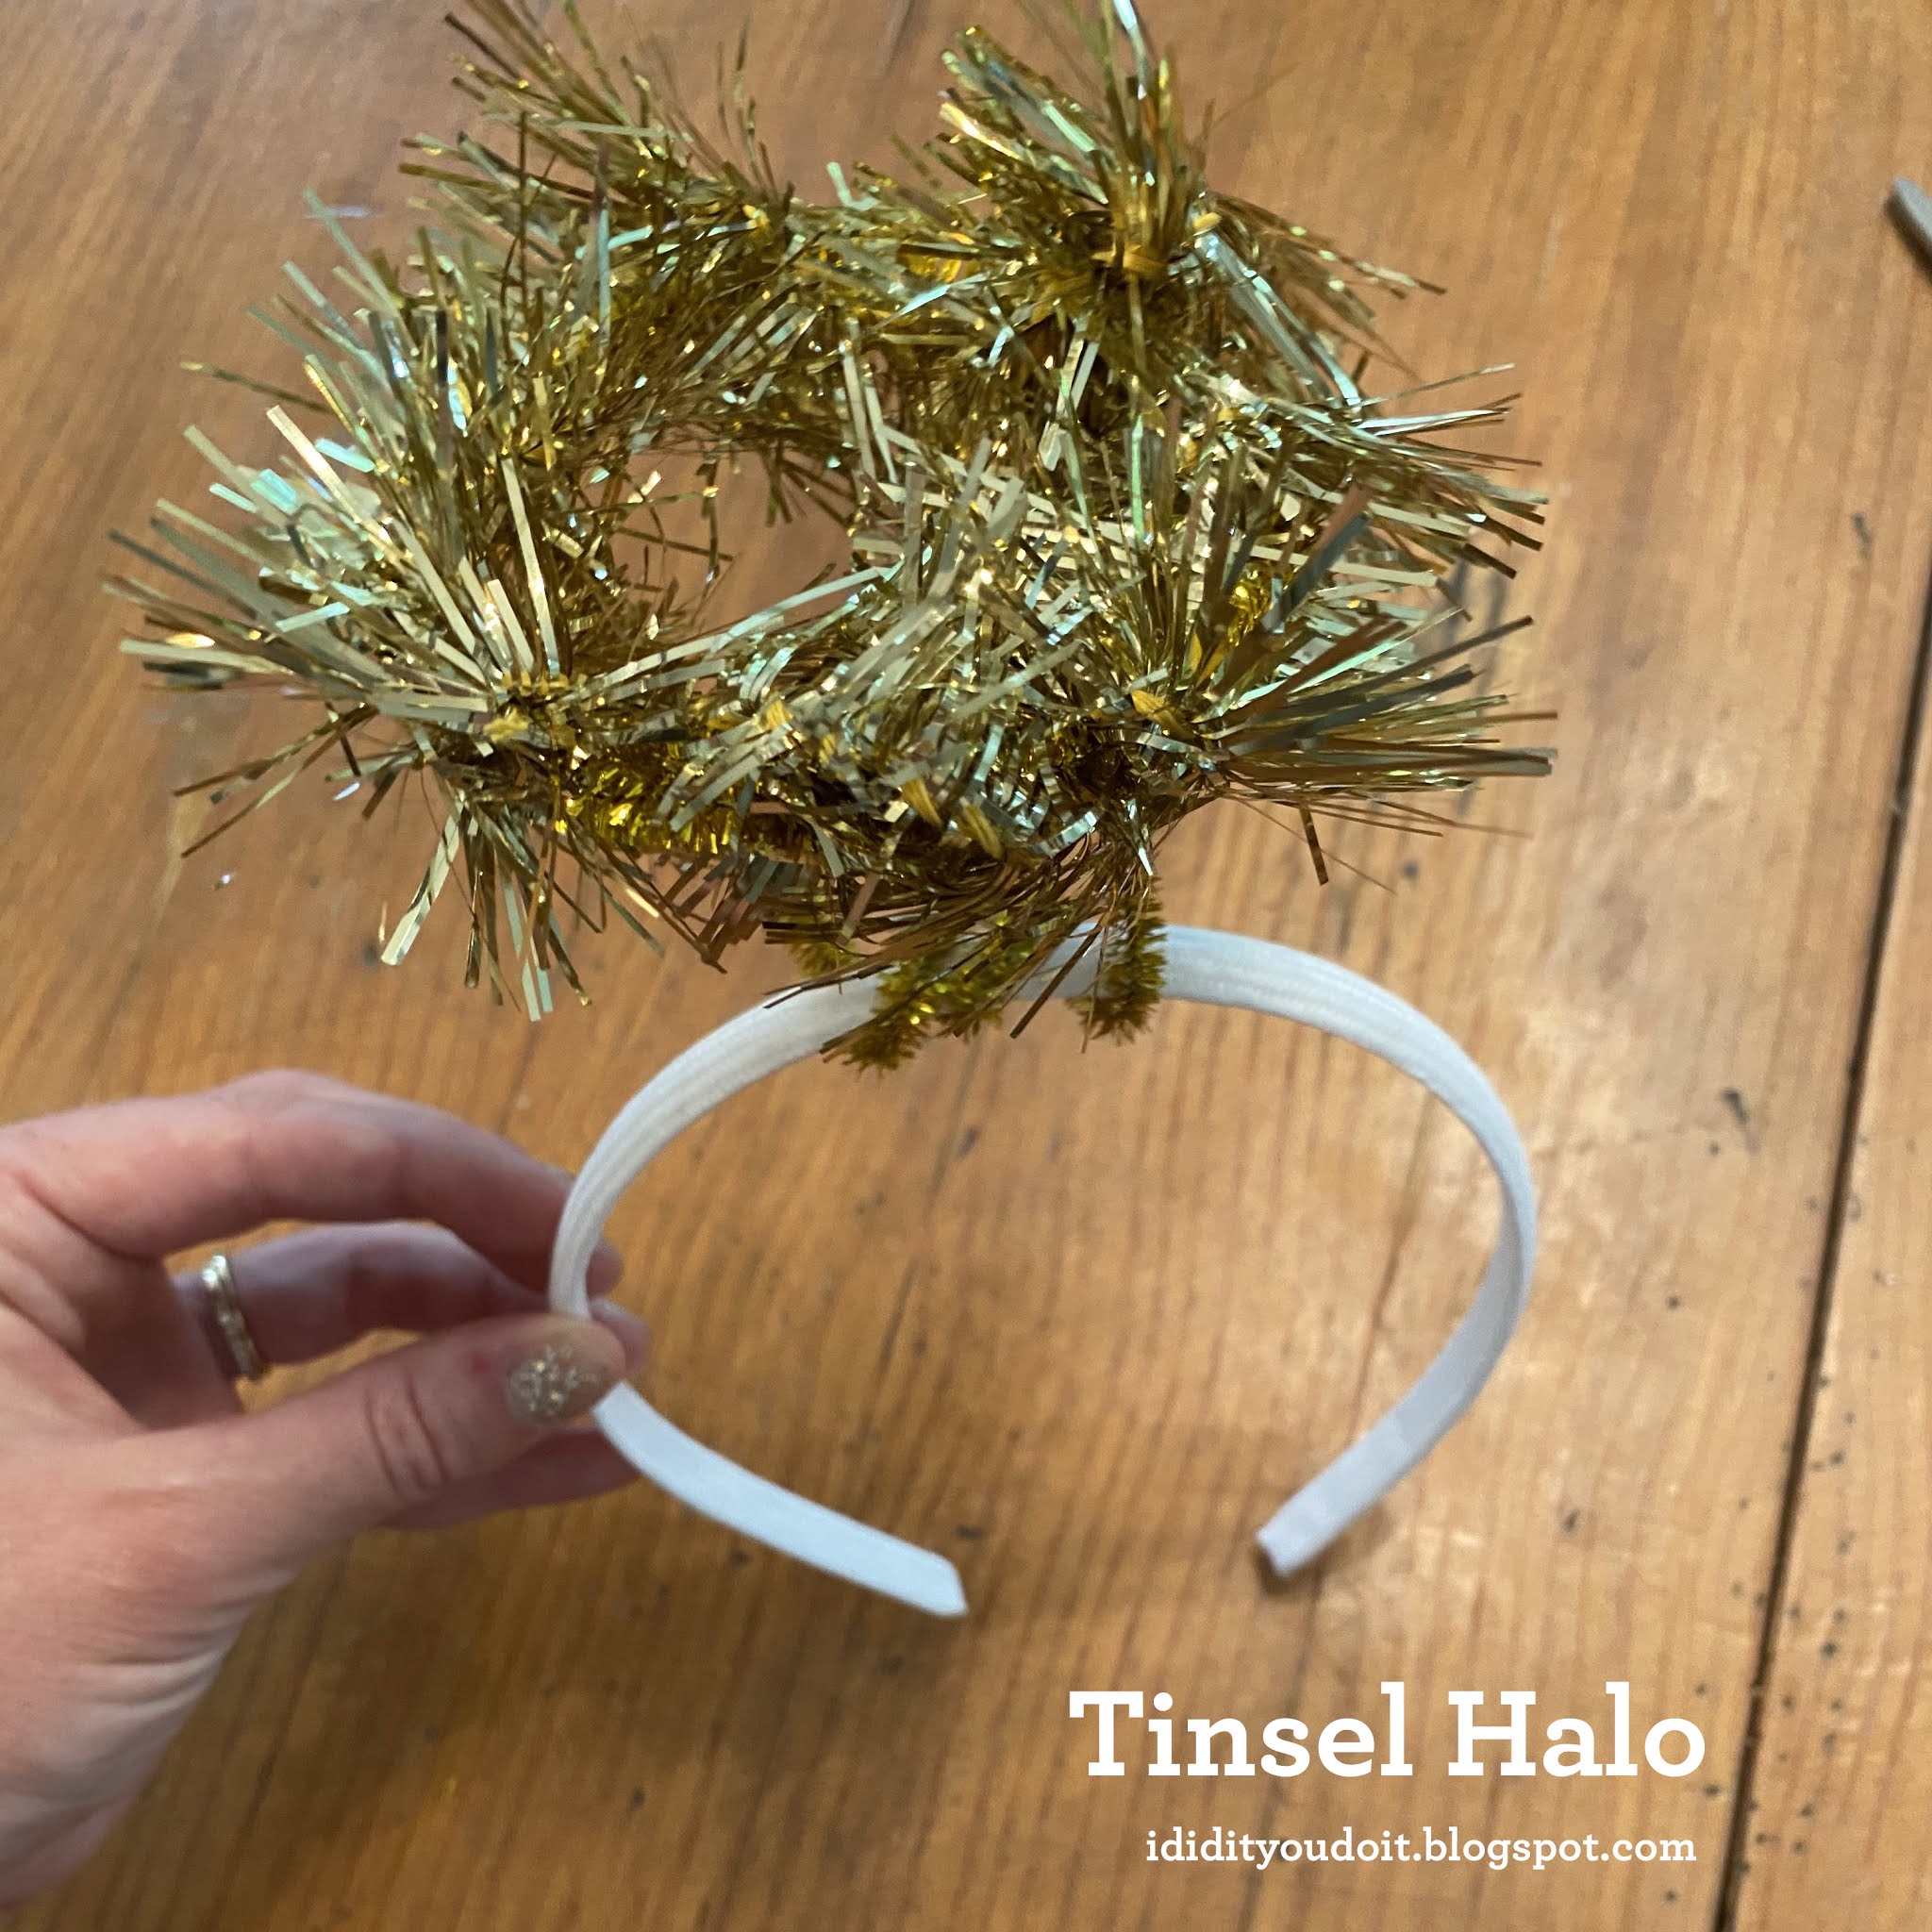 I Did It - You Do It: Tinsel Halo